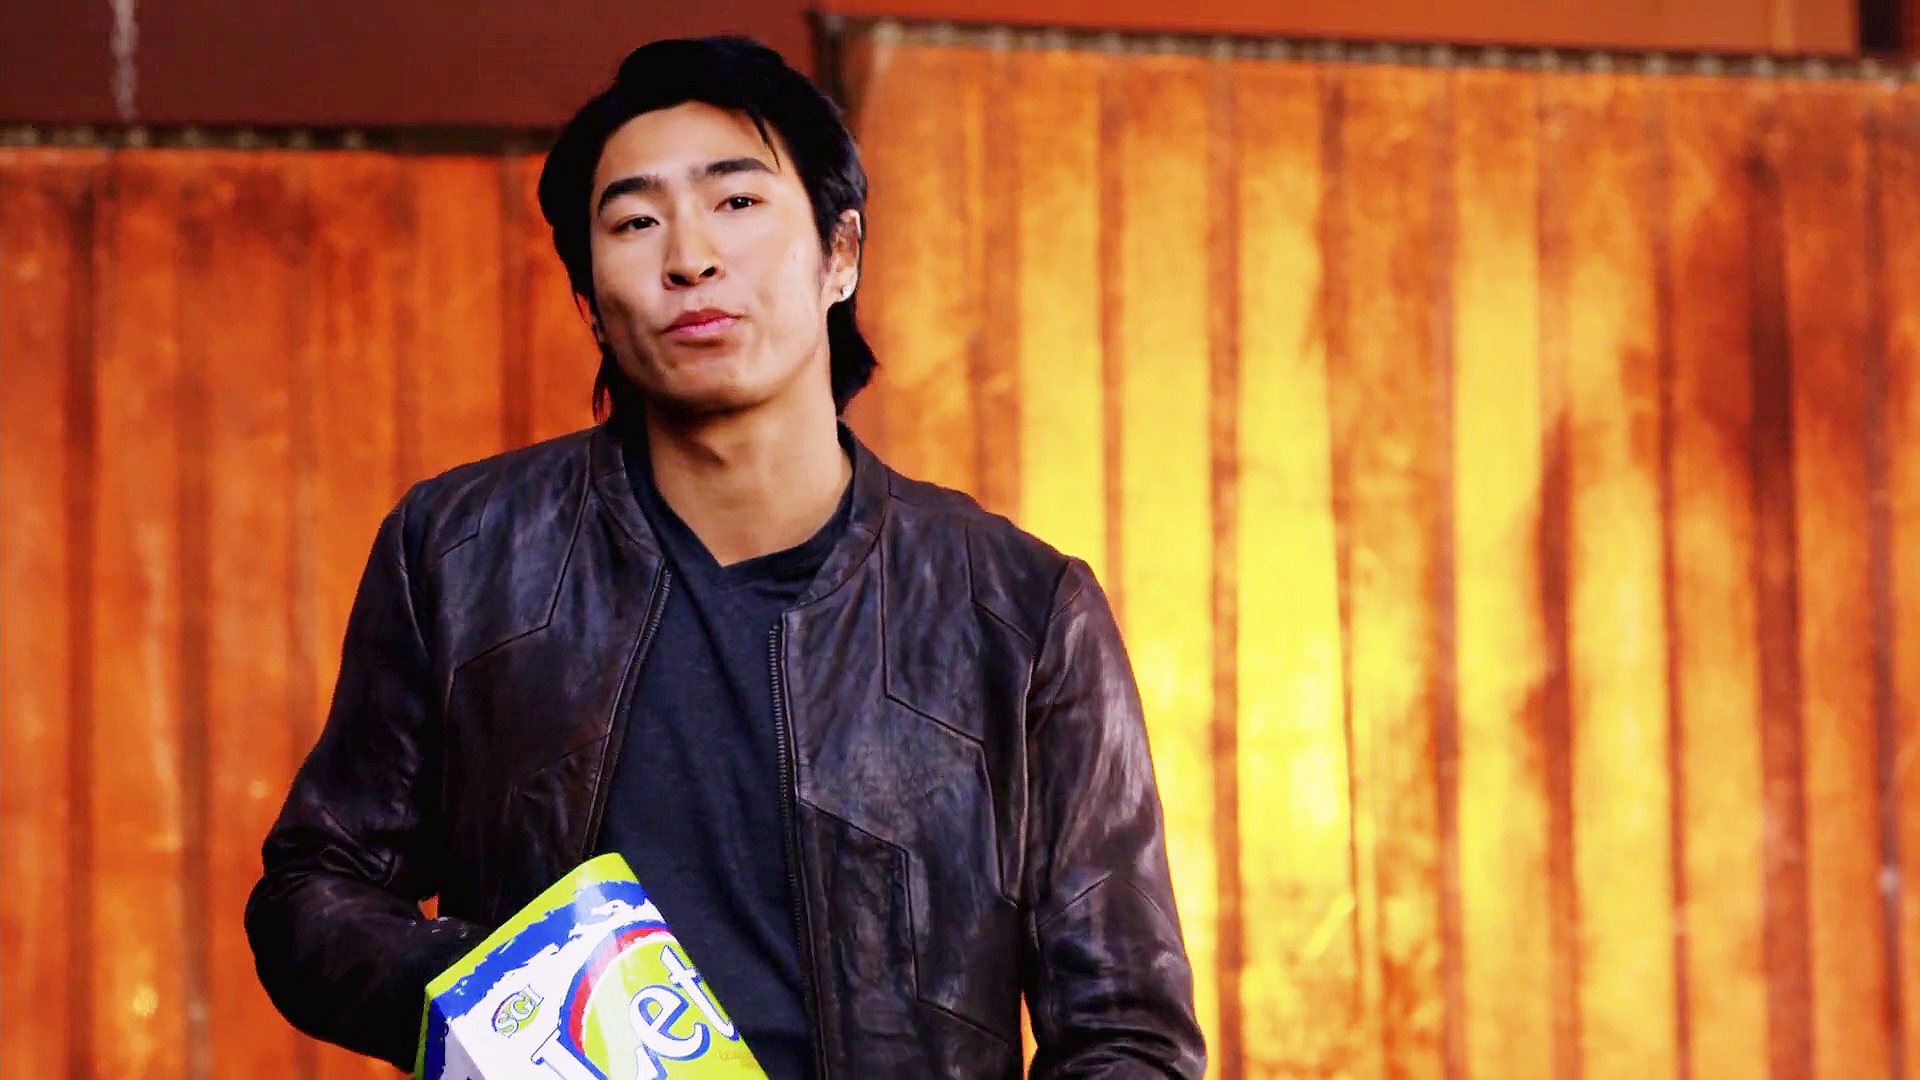 Chris Pang as 'Cool Asian Guy' in Superfast! 2015